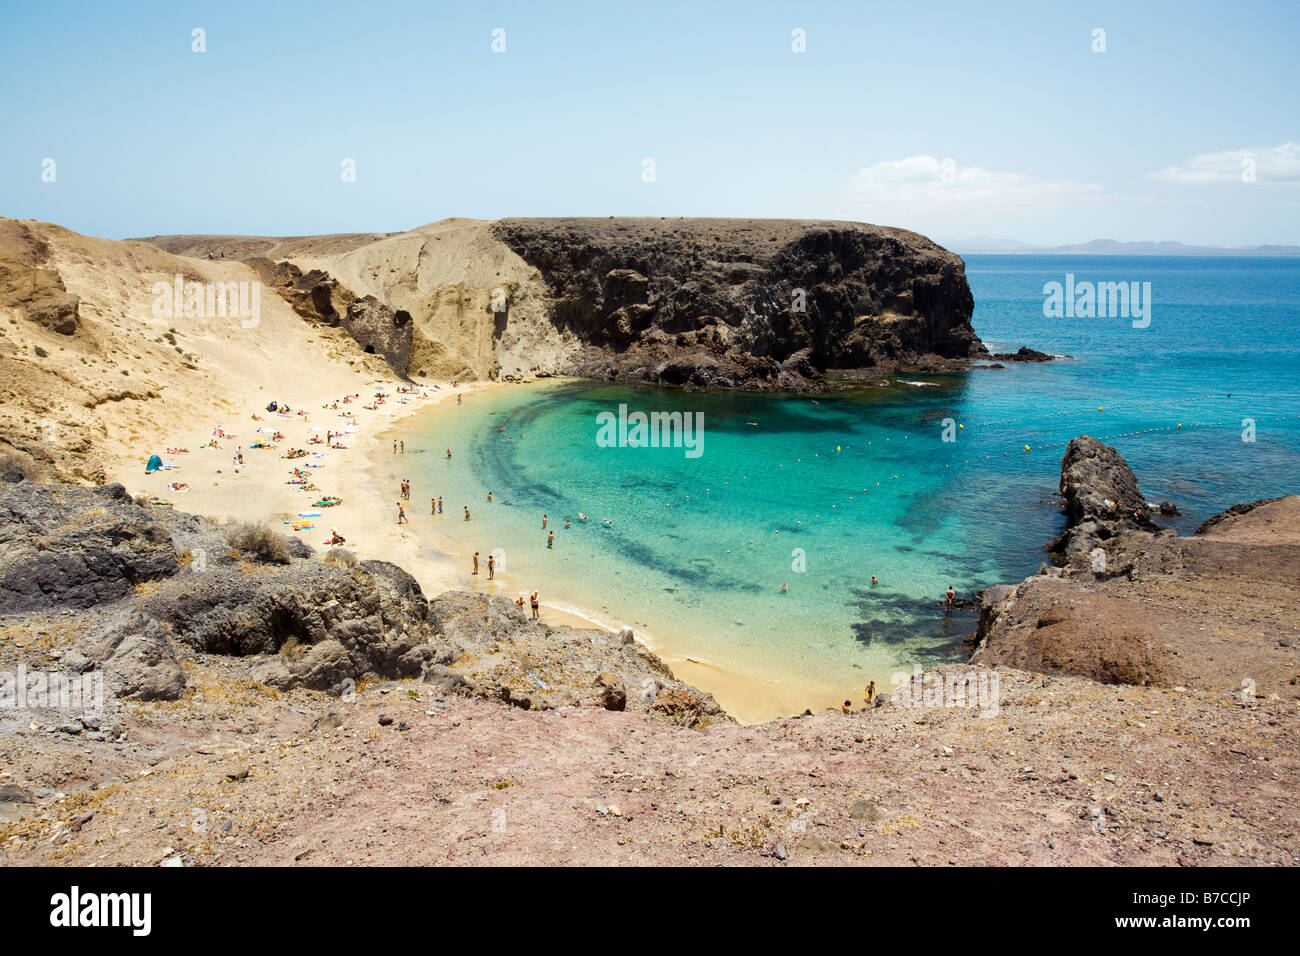 Small Turquoise Bay At Papagayo Beaches Lanzarote Canary Islands Stock Photo Alamy